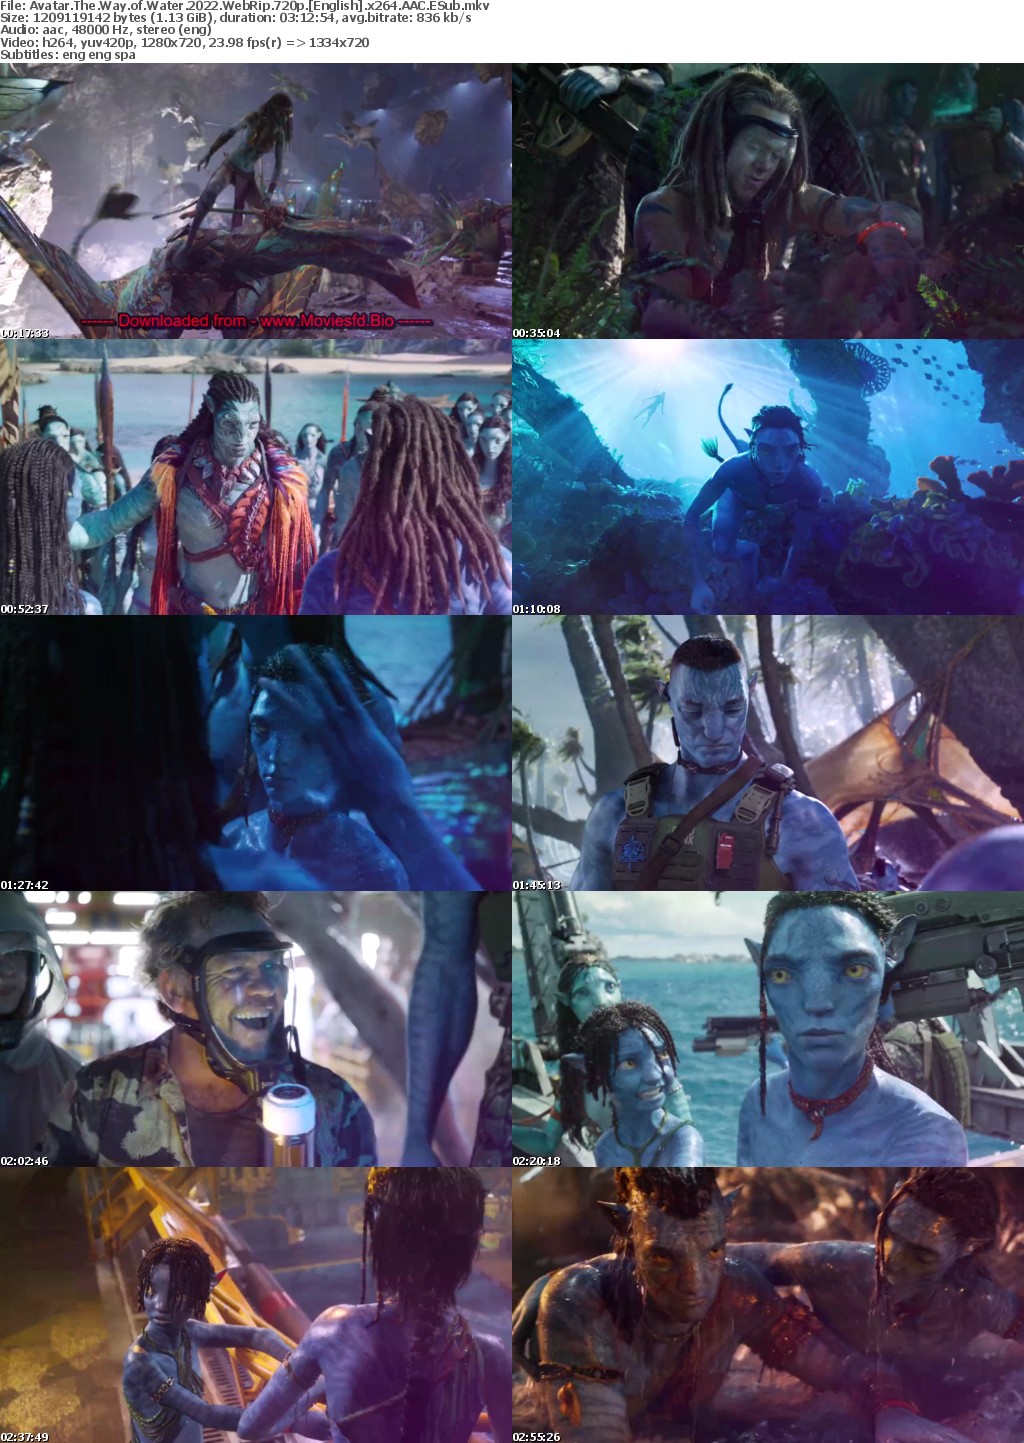 MoviesFD -Avatar The Way of Water 2022 WebRip 720p English x264 AAC ESub